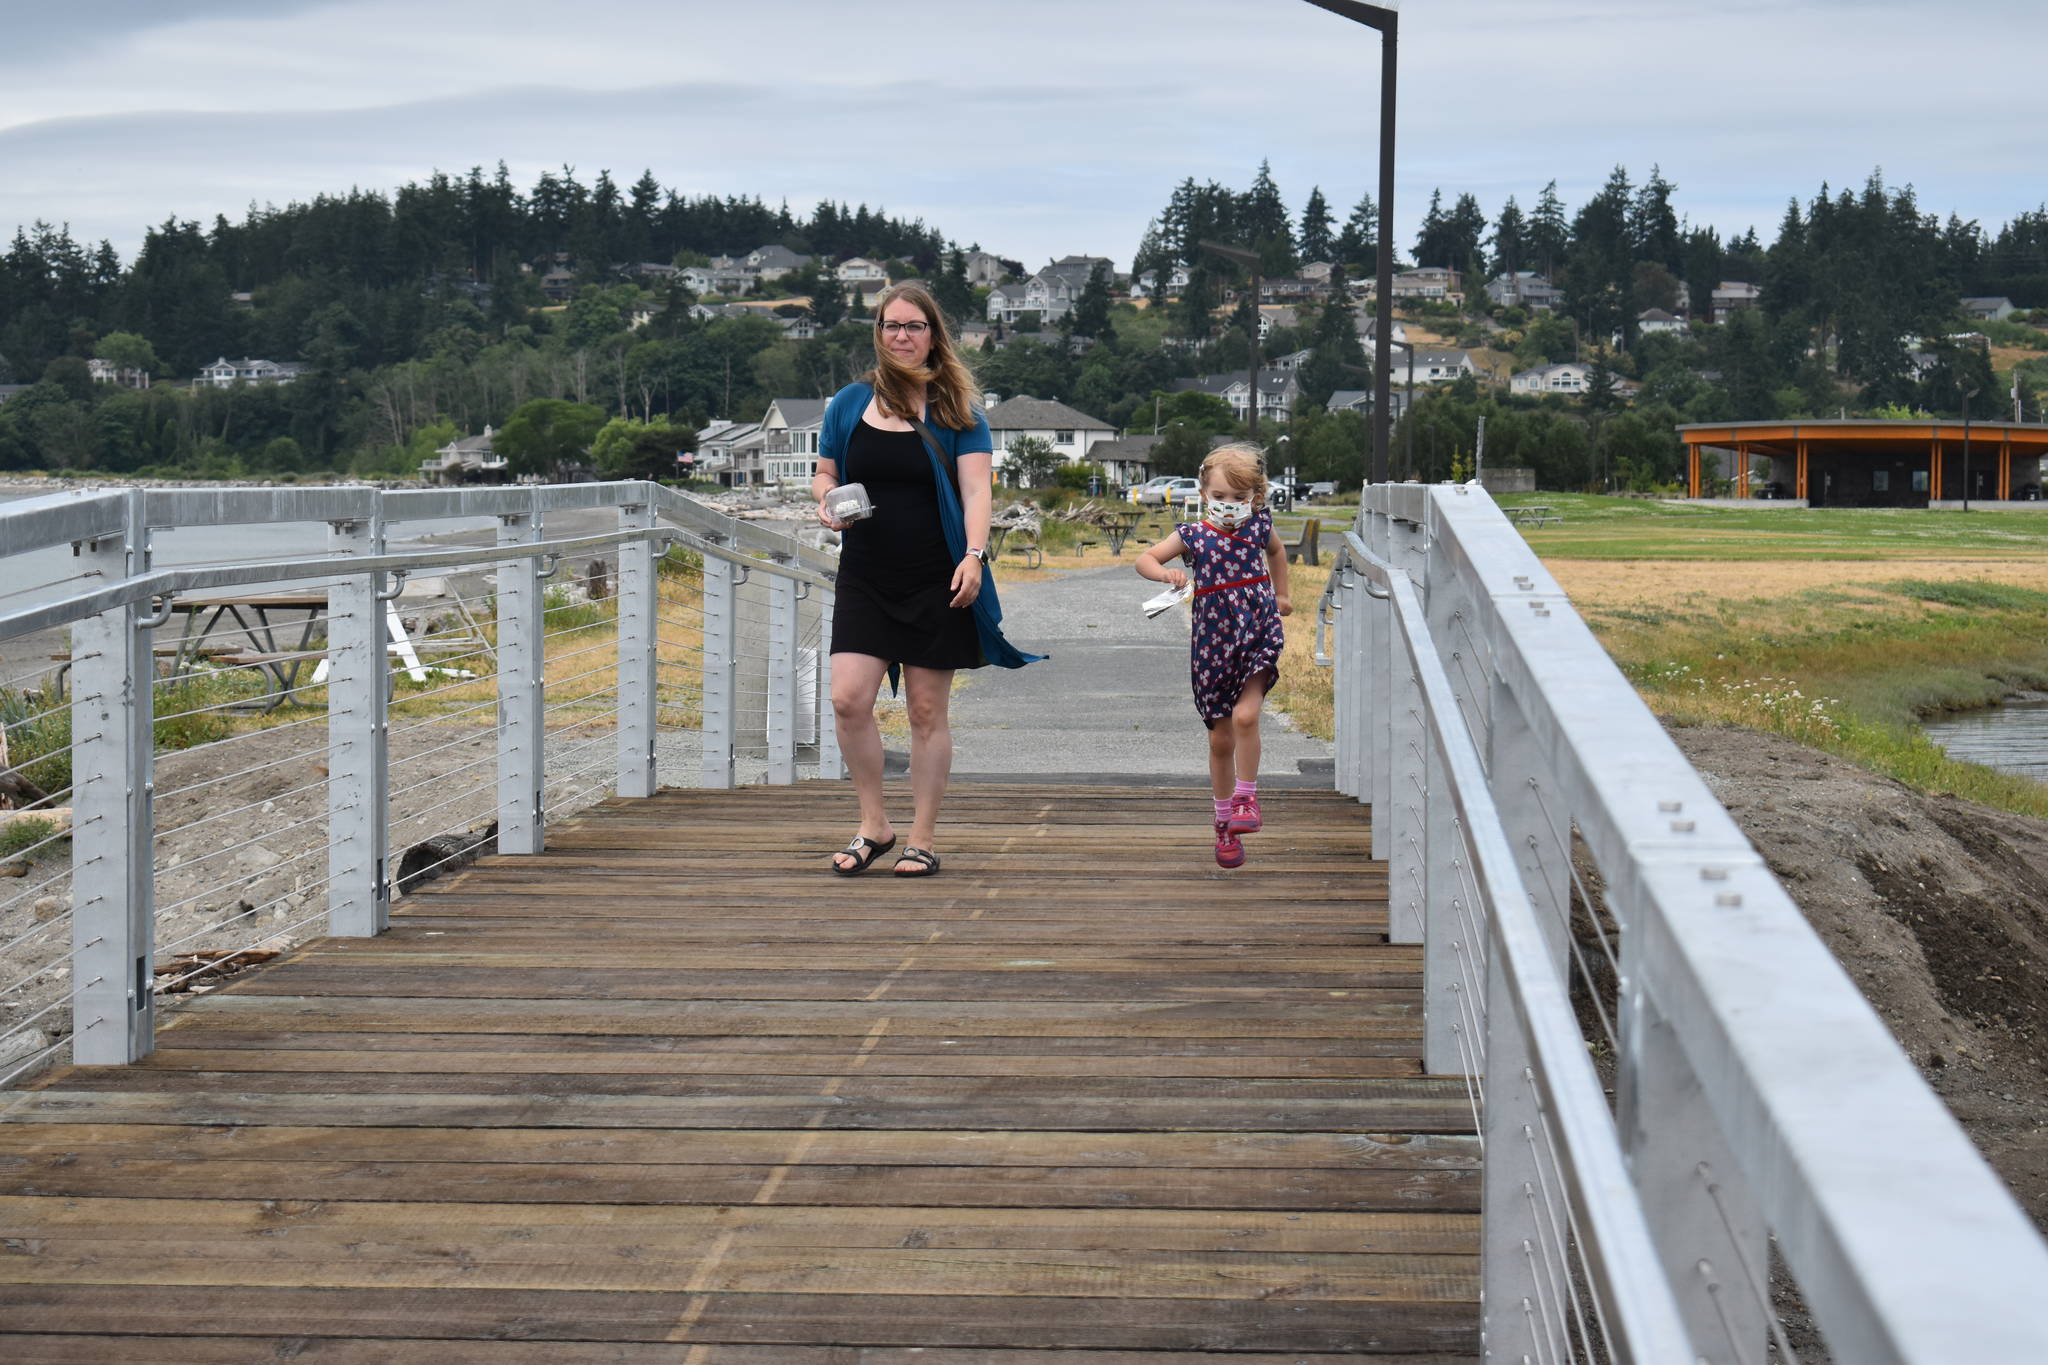 Photo by Emily Gilbert/Whidbey News-Times
Katie Toft and her four-year-old daughter Bailey walk across the newly renovated Rotary Memorial Bridge. Katie Toft's father, Dick Toft, is one of the Rotarians memorialized on a plaque next to the bridge.